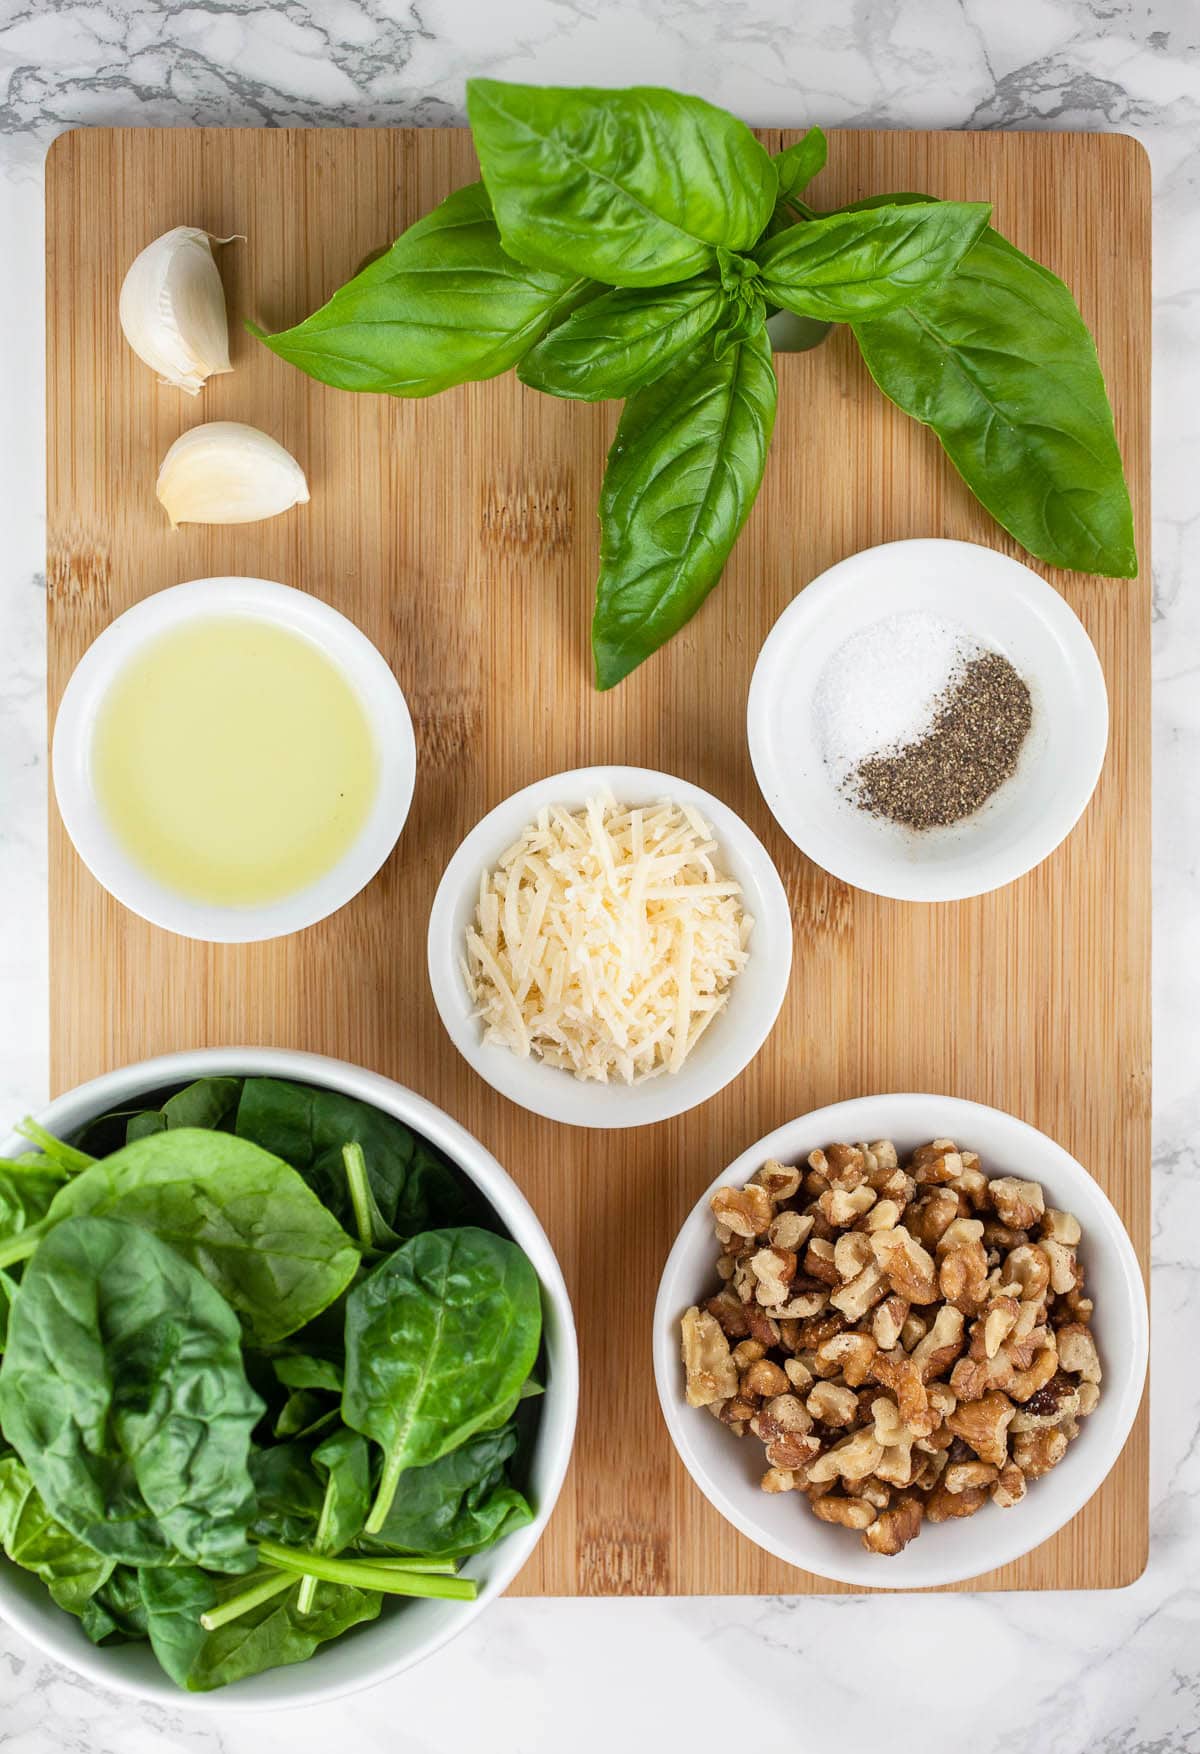 Spinach, walnuts, Parmesan cheese, olive oil, garlic, basil, salt, and pepper on wooden cutting board.